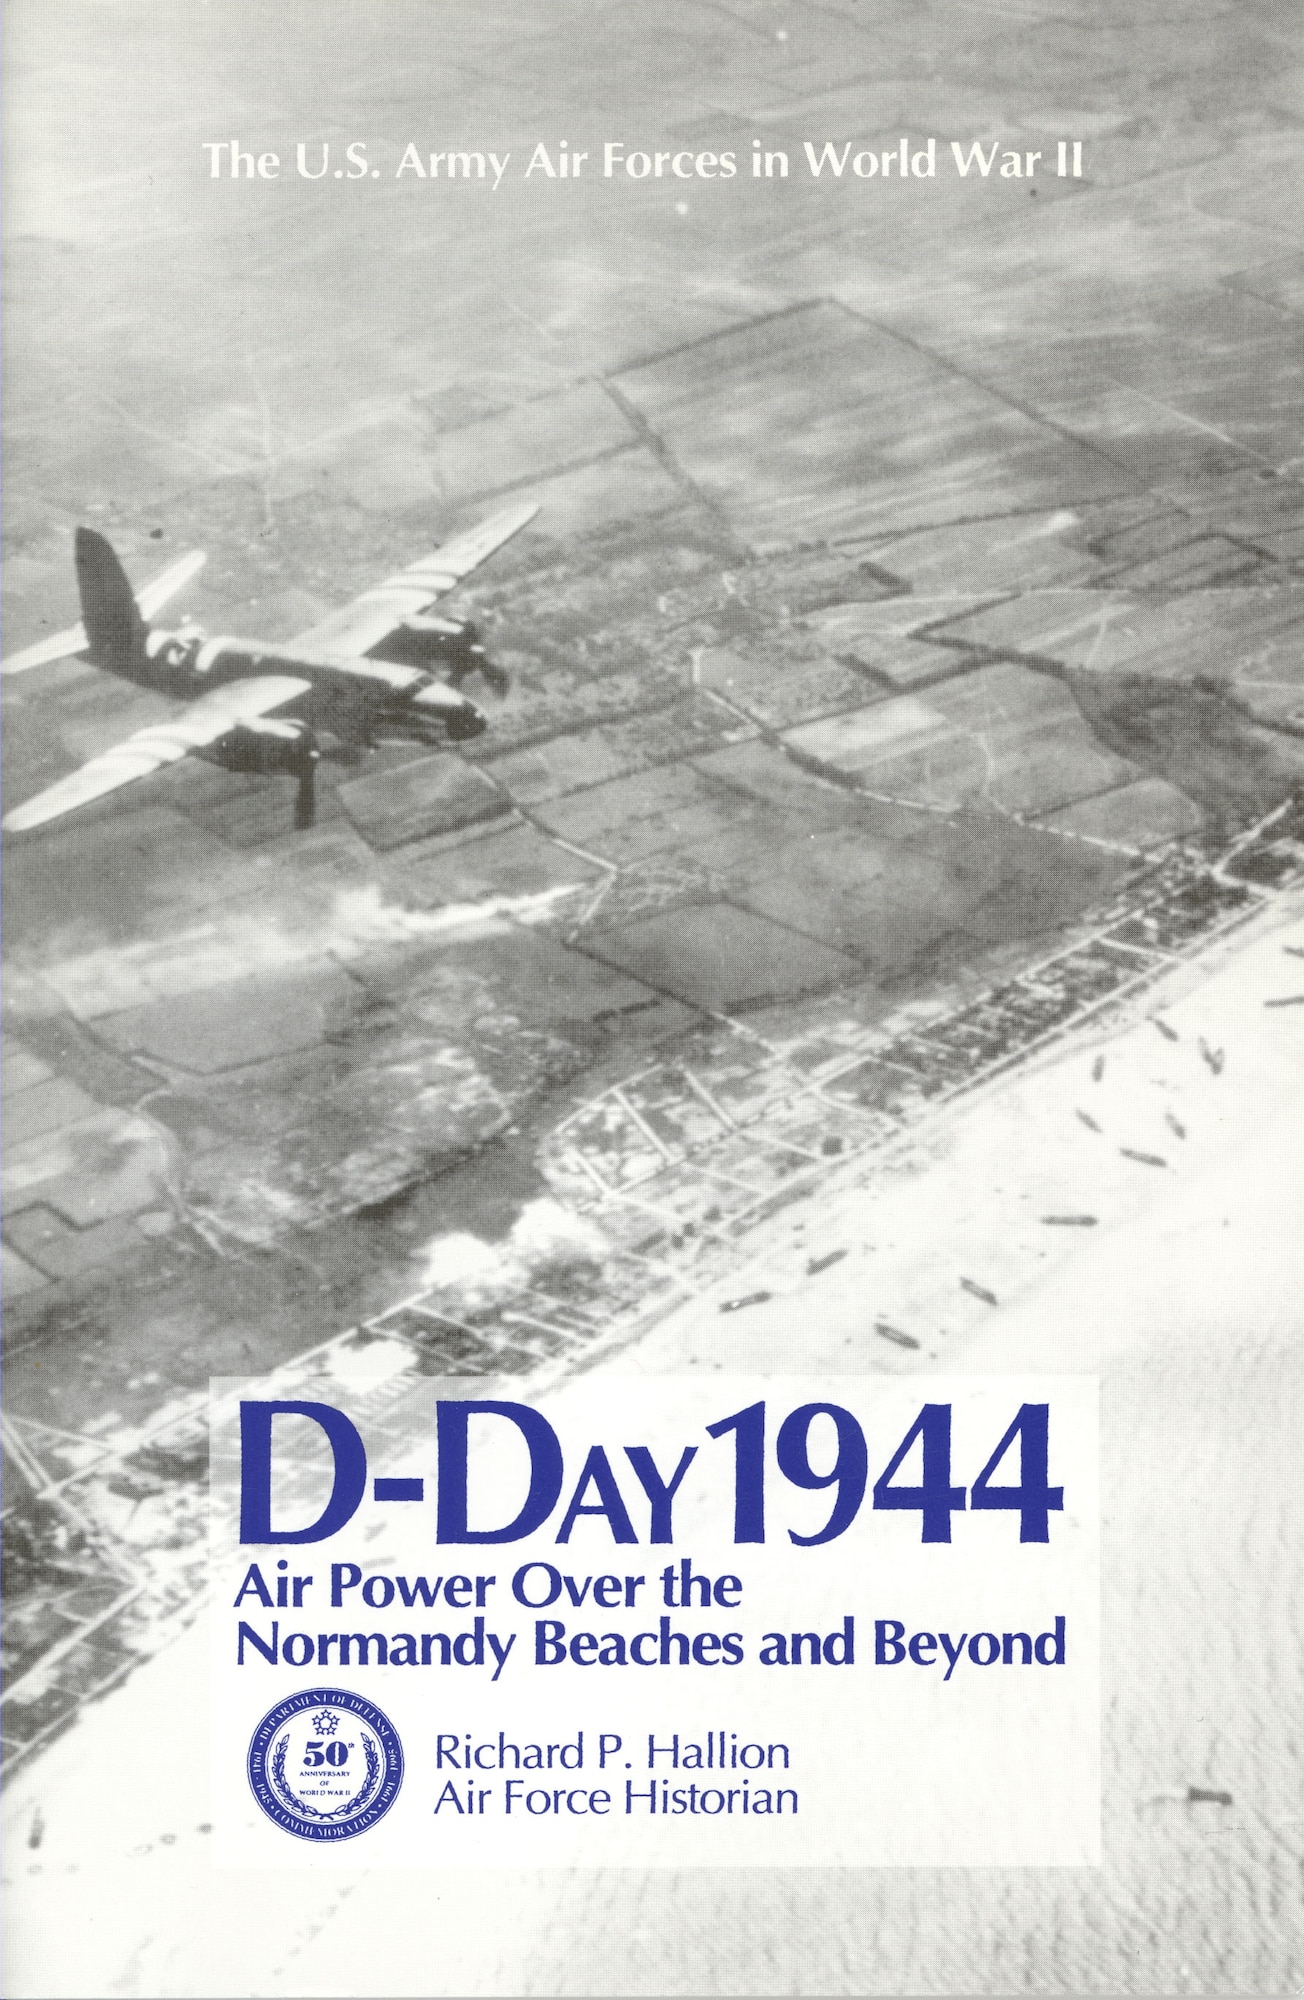 D-Day 1944: Air Power Over the Normandy Beaches and Beyond by Richard P. Hallion